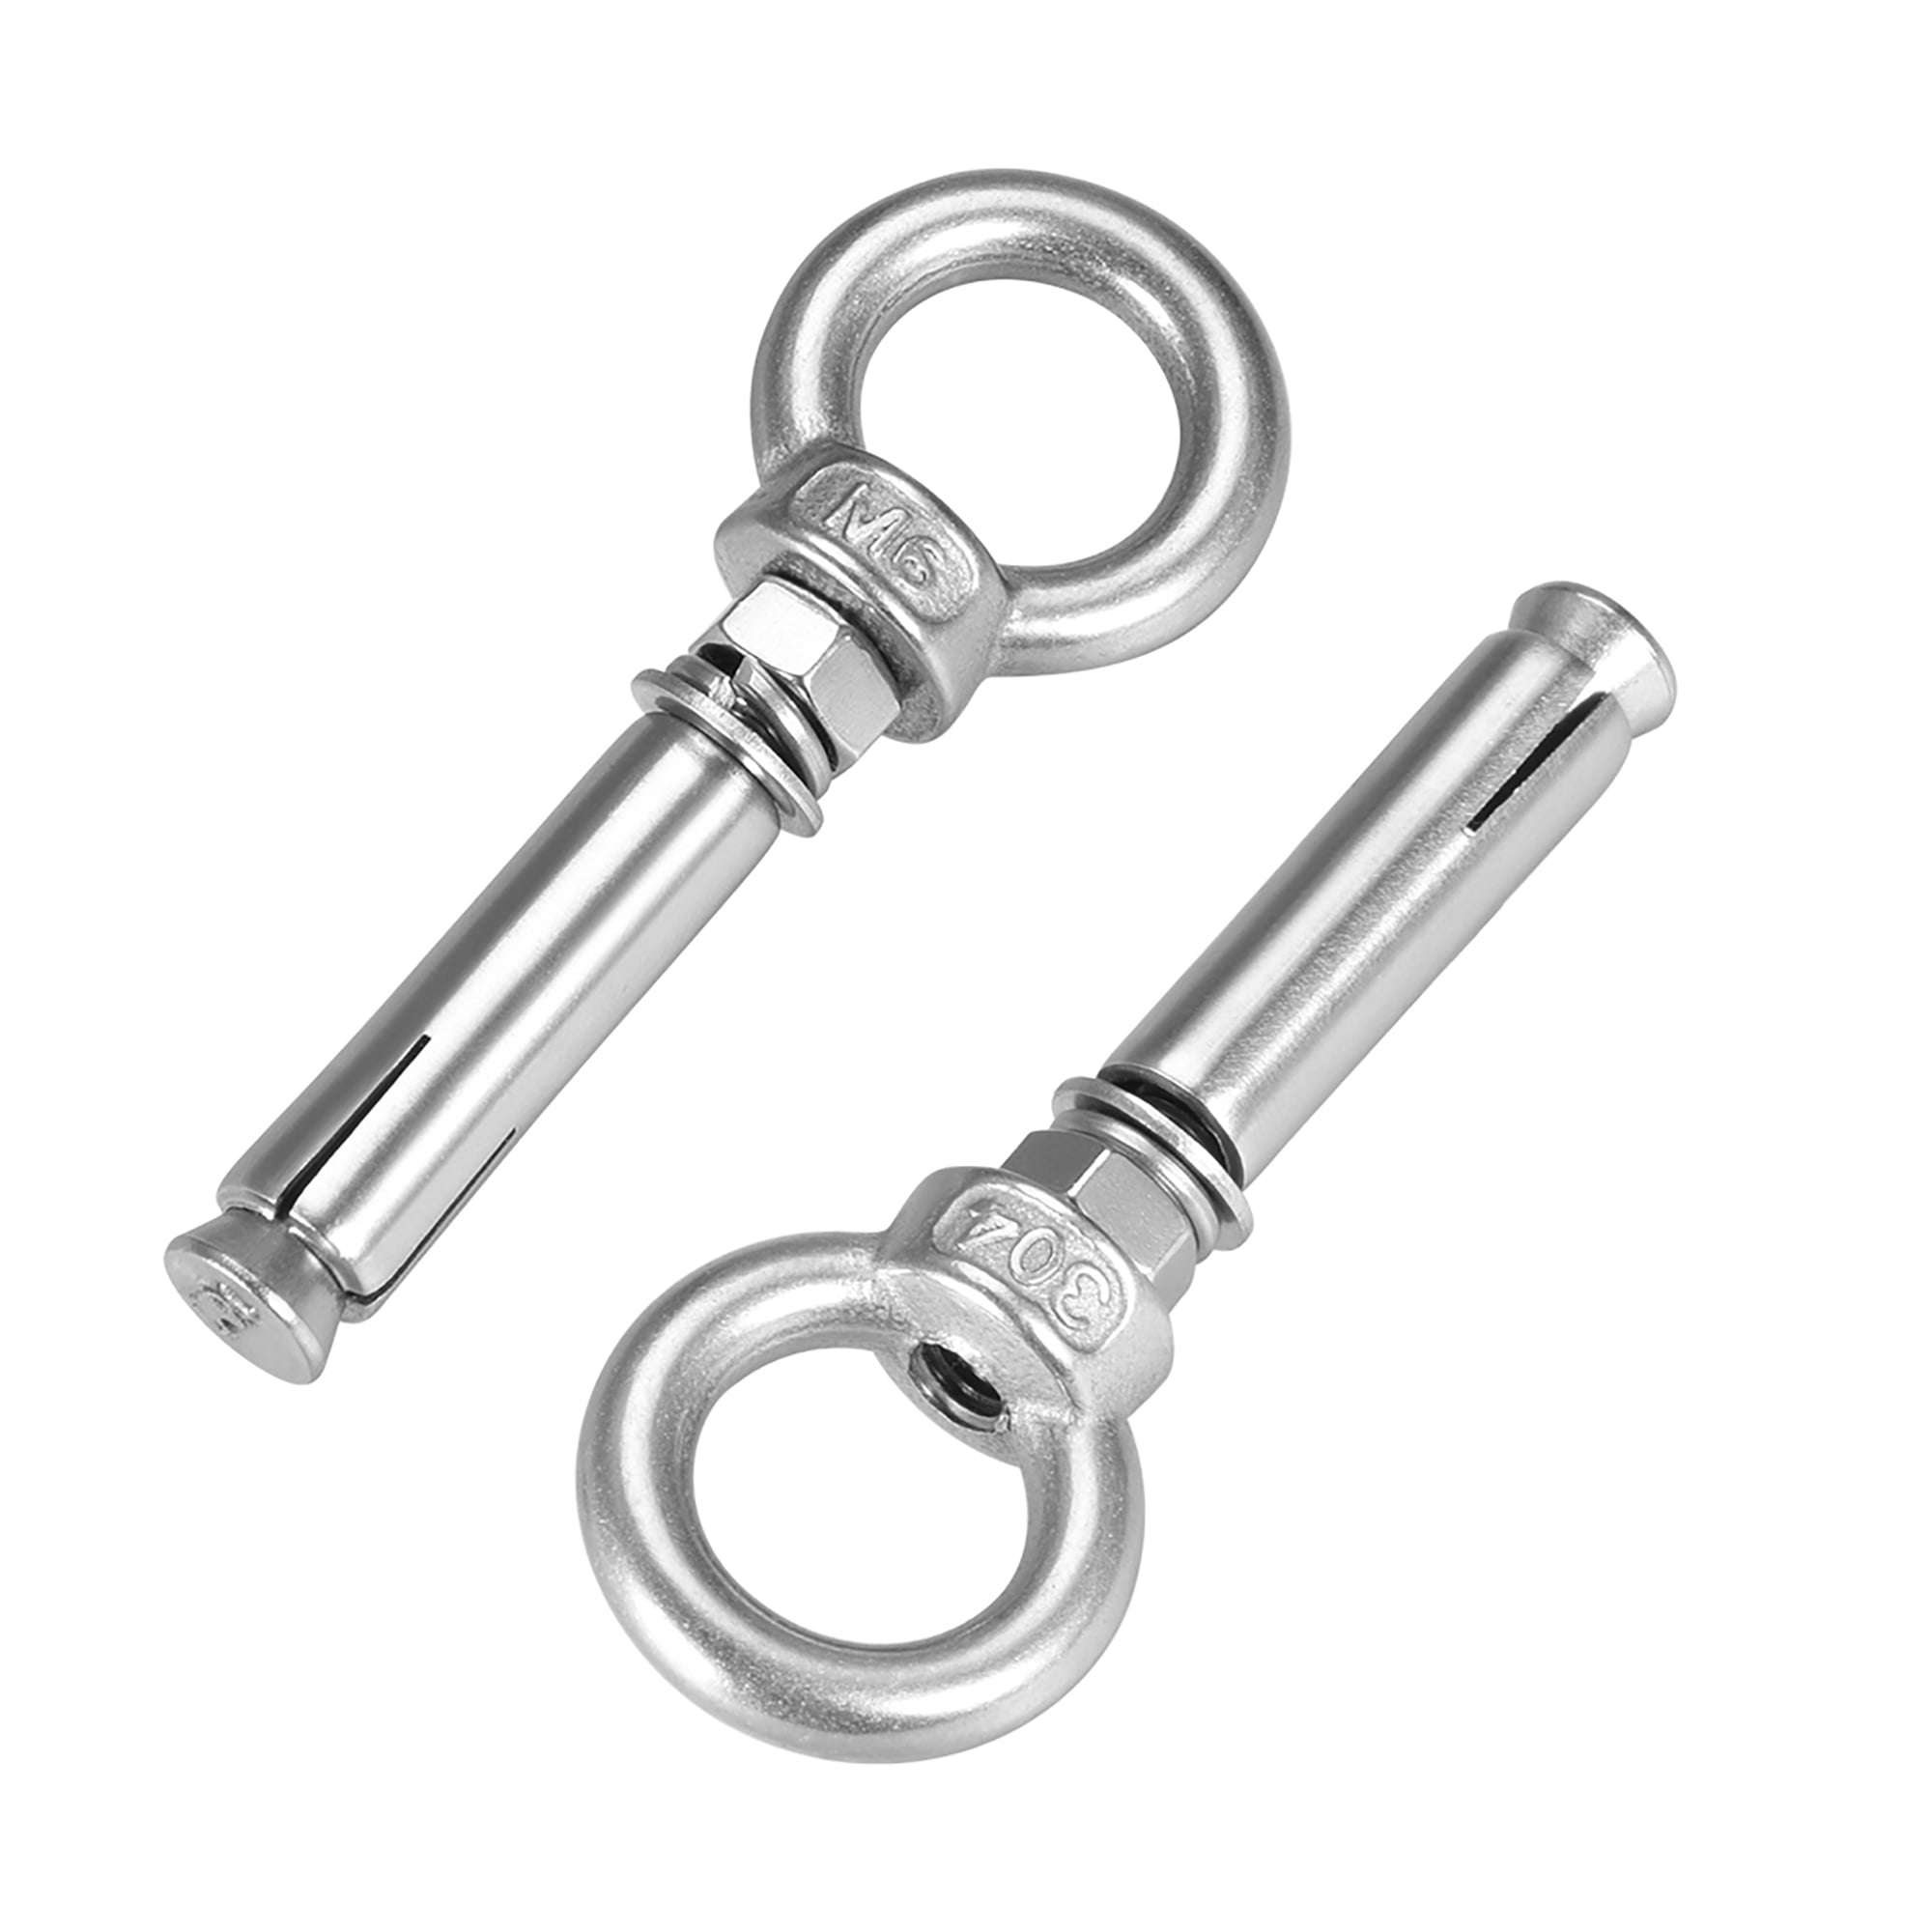 2pcs 10mm Stainless Steel Sleeve Anchors Eye Expansion Bolts Rock Climbing 